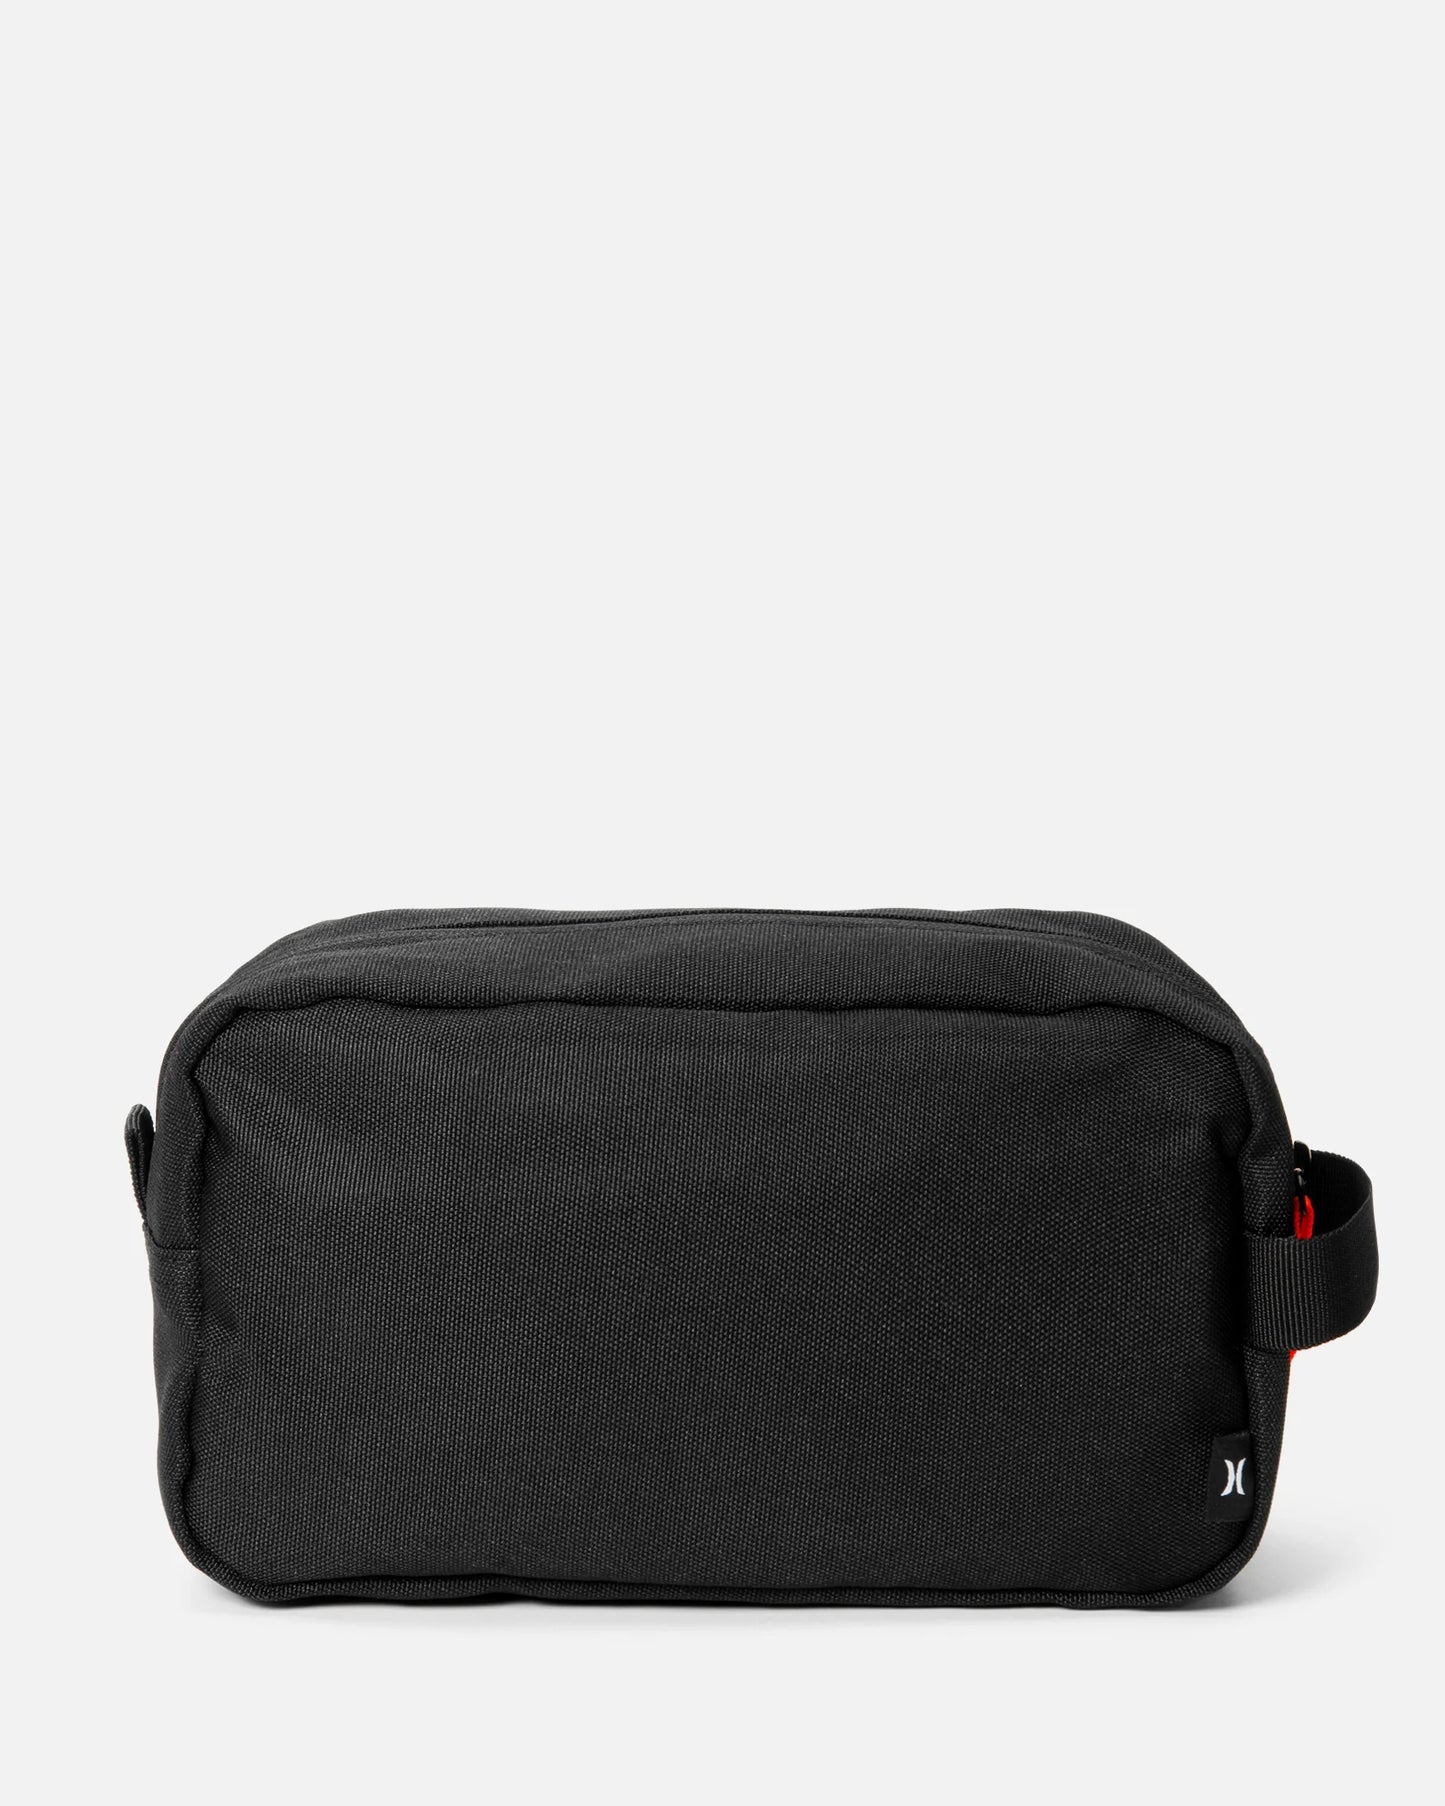 NO COMPLY TRAVEL/UTILITY BAG - VARIOUS COLORS - LIMITED SUPPLY